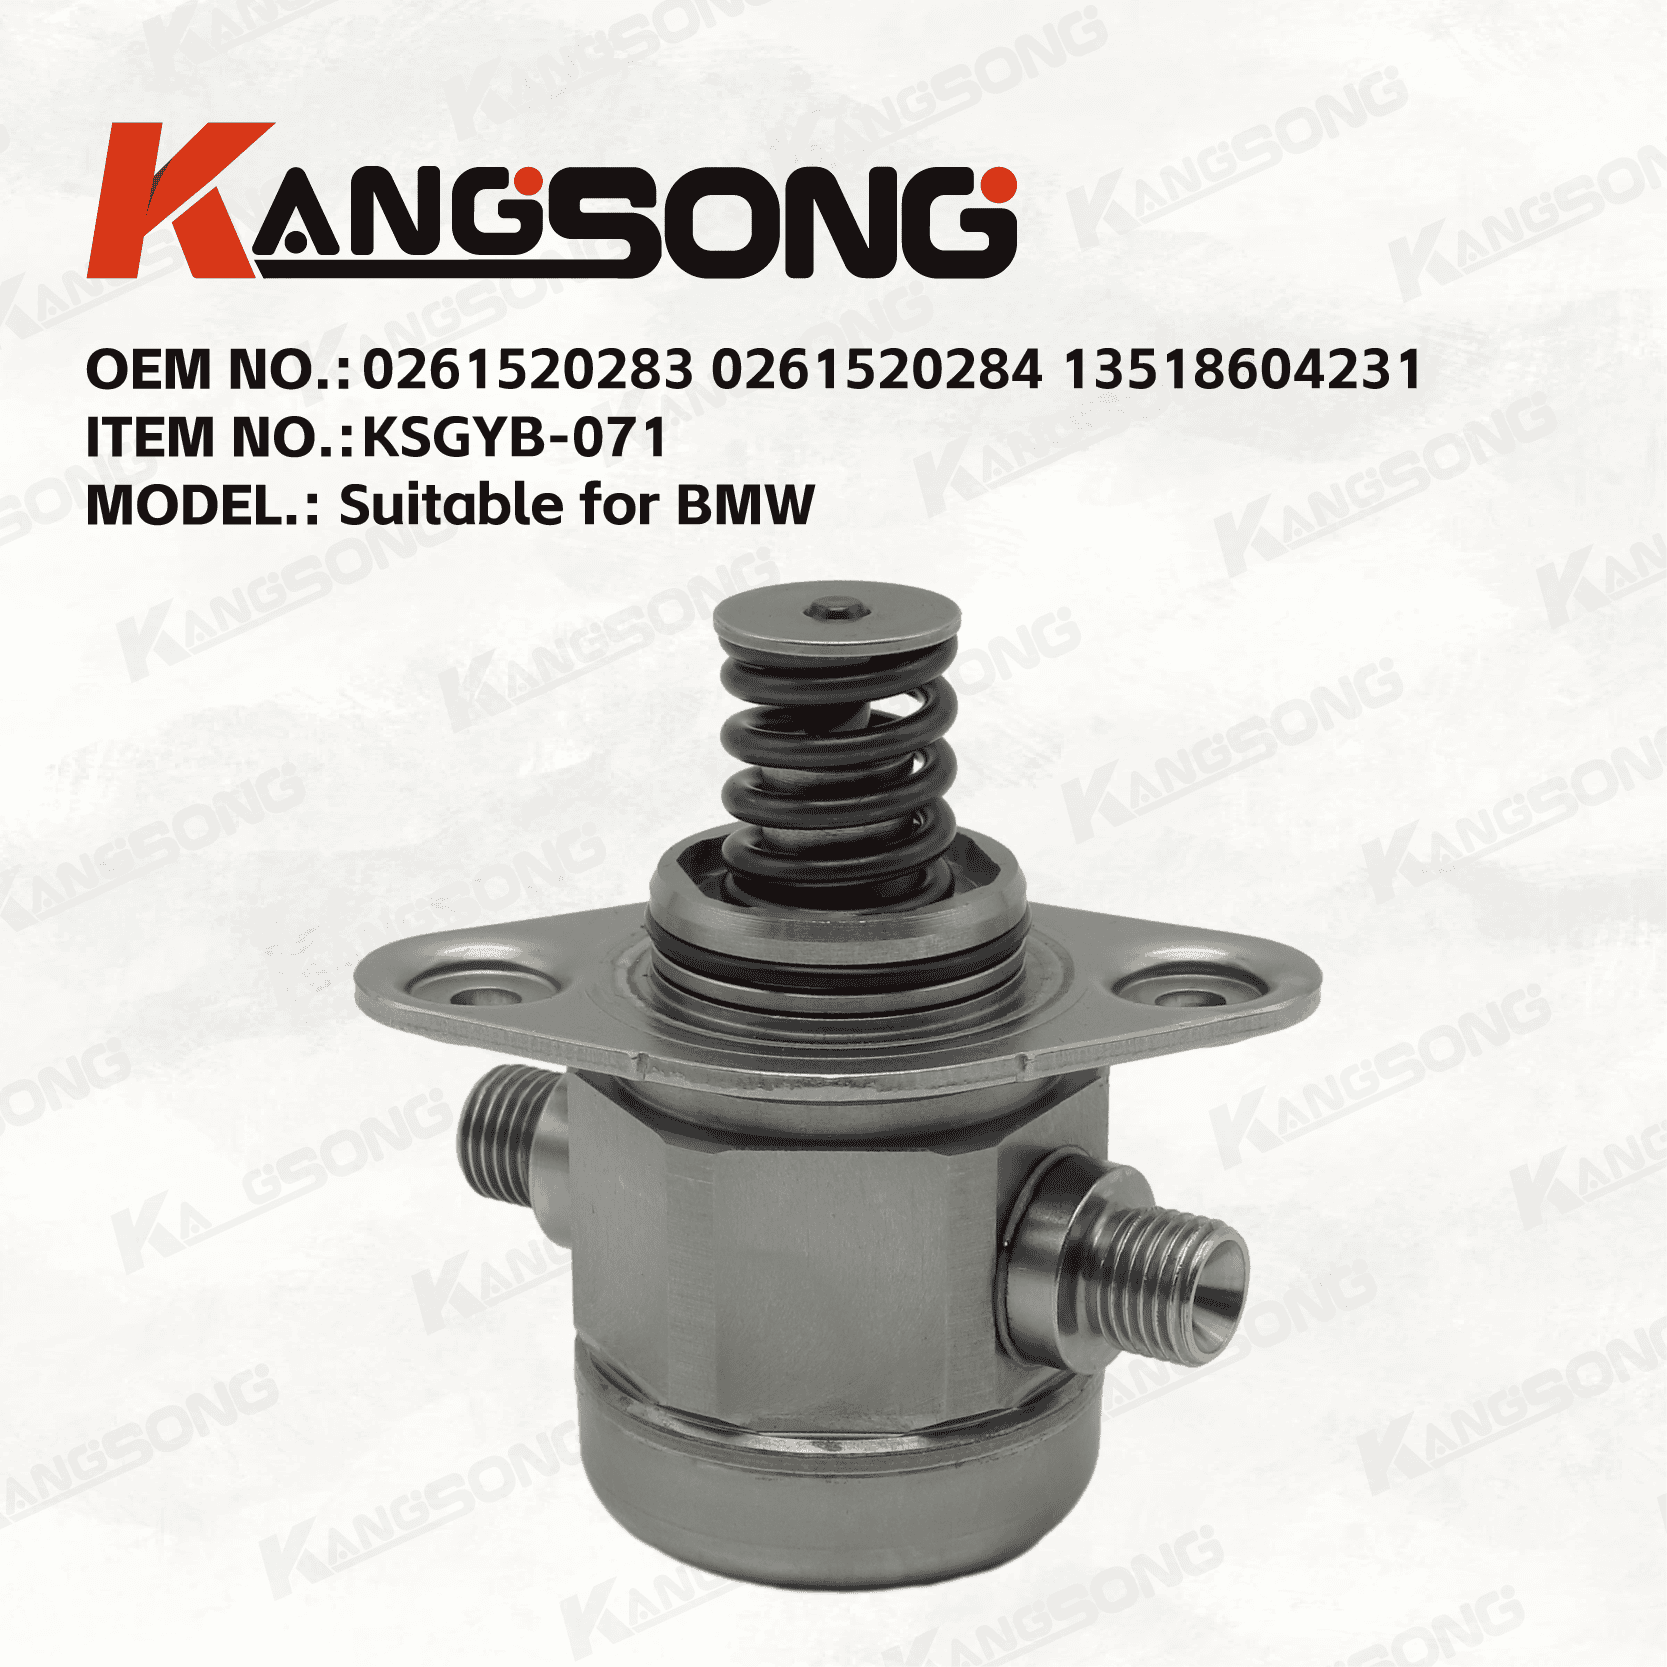 Applicable to BMW/0261520283 0261520284 13518604231/High pressure fuel pump/KSGYB-071